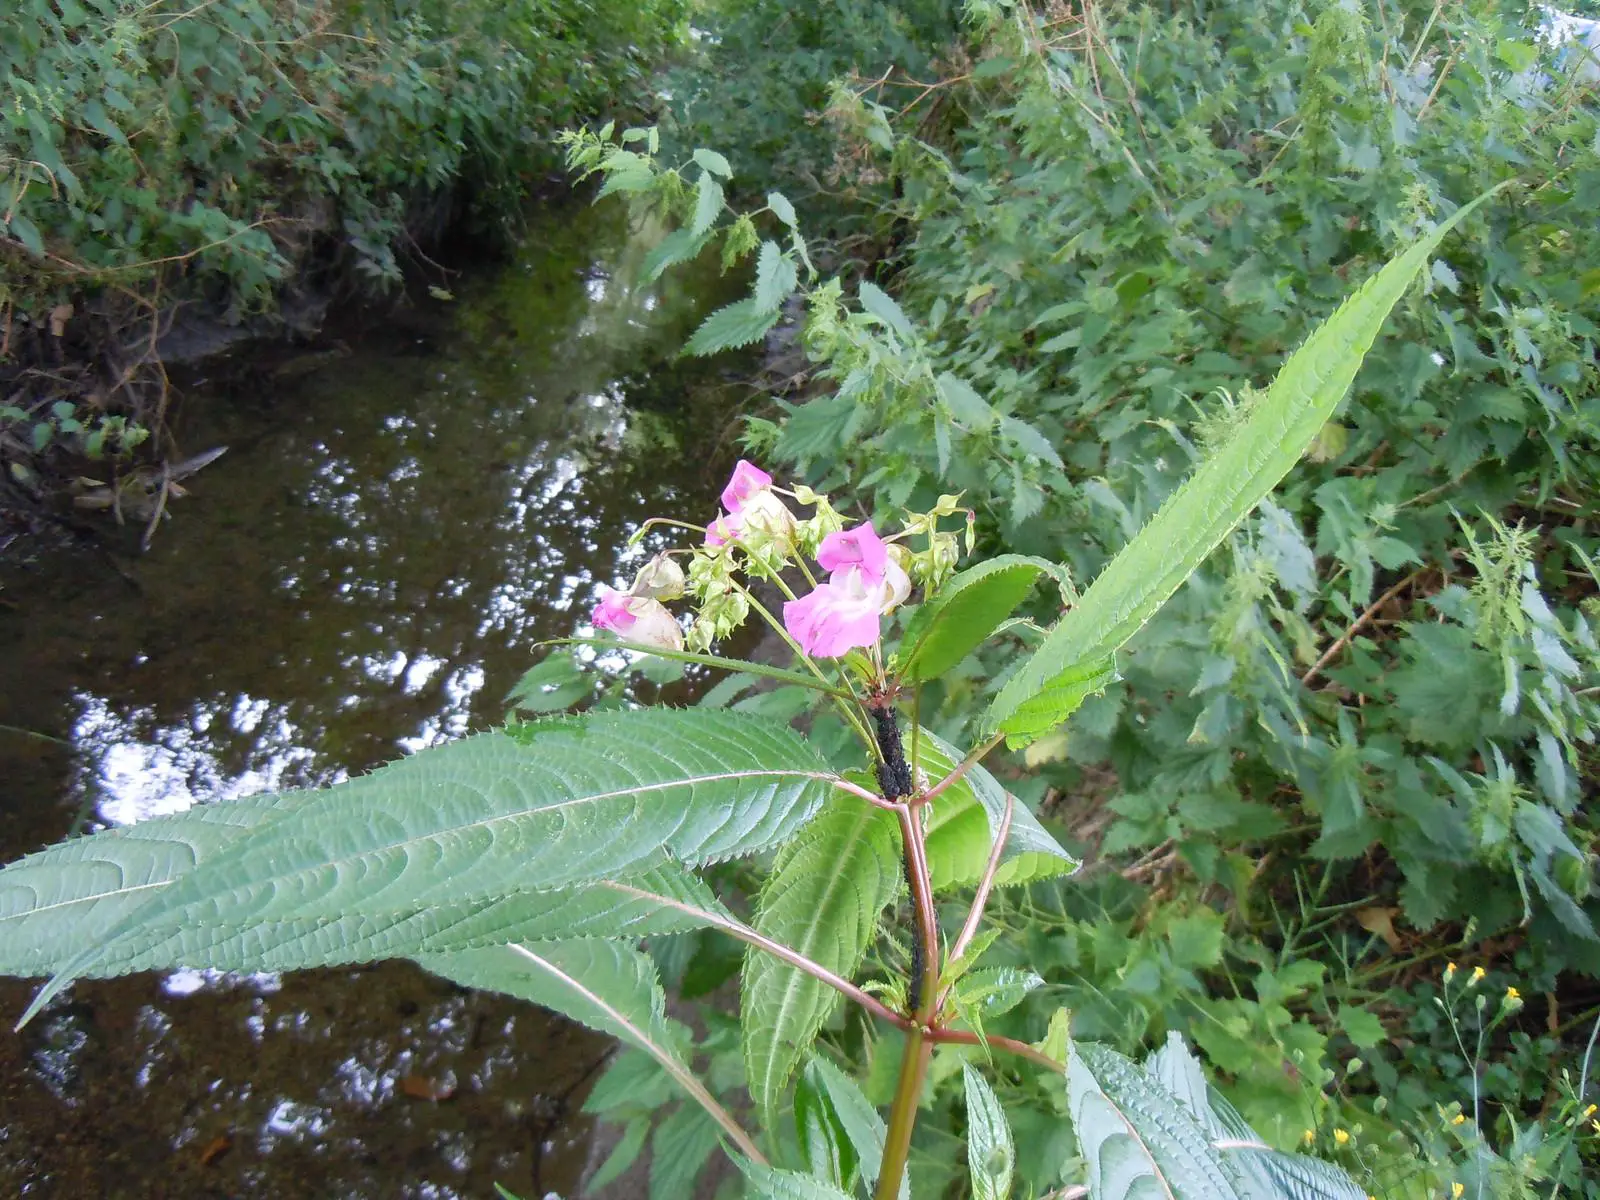 Himalayan Balsam consumes verges and waterways as it thrives in these conditions